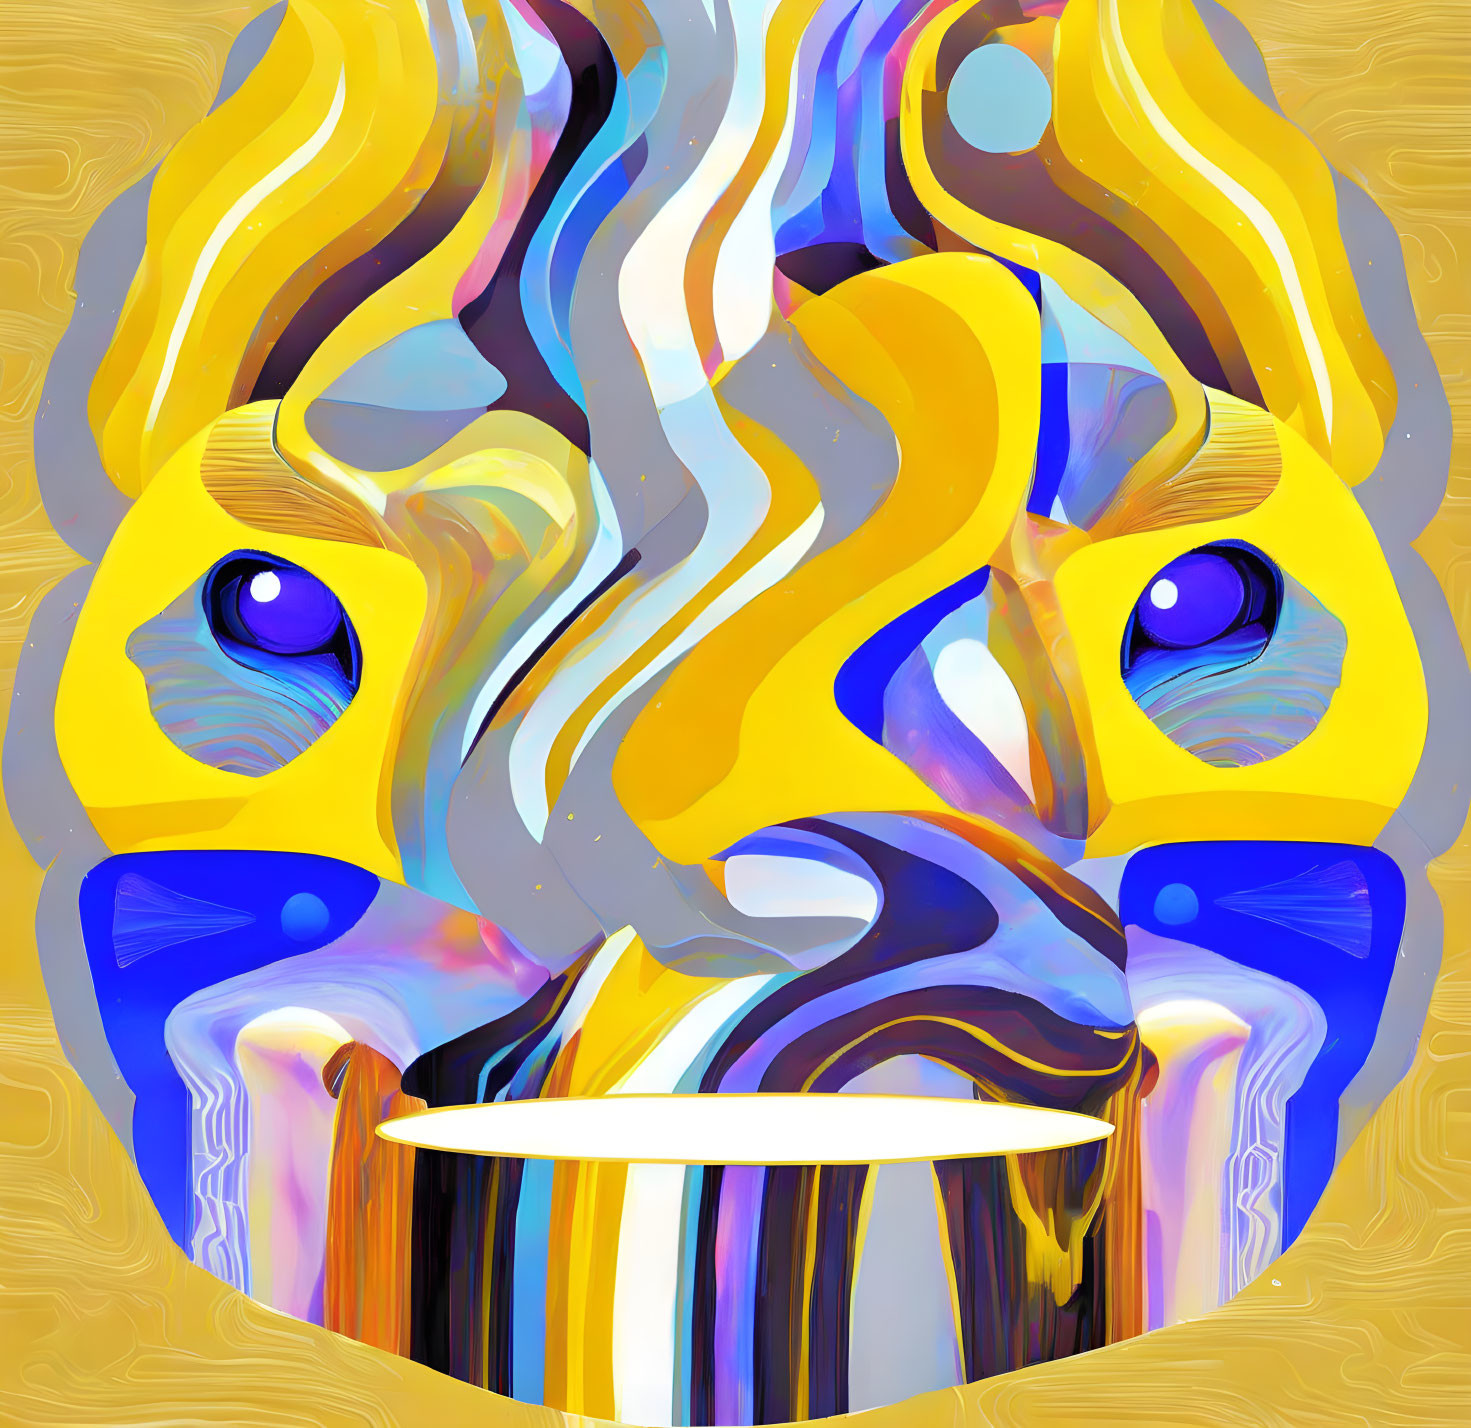 Vibrant Abstract Artwork: Stylized Face with Prominent Eyes